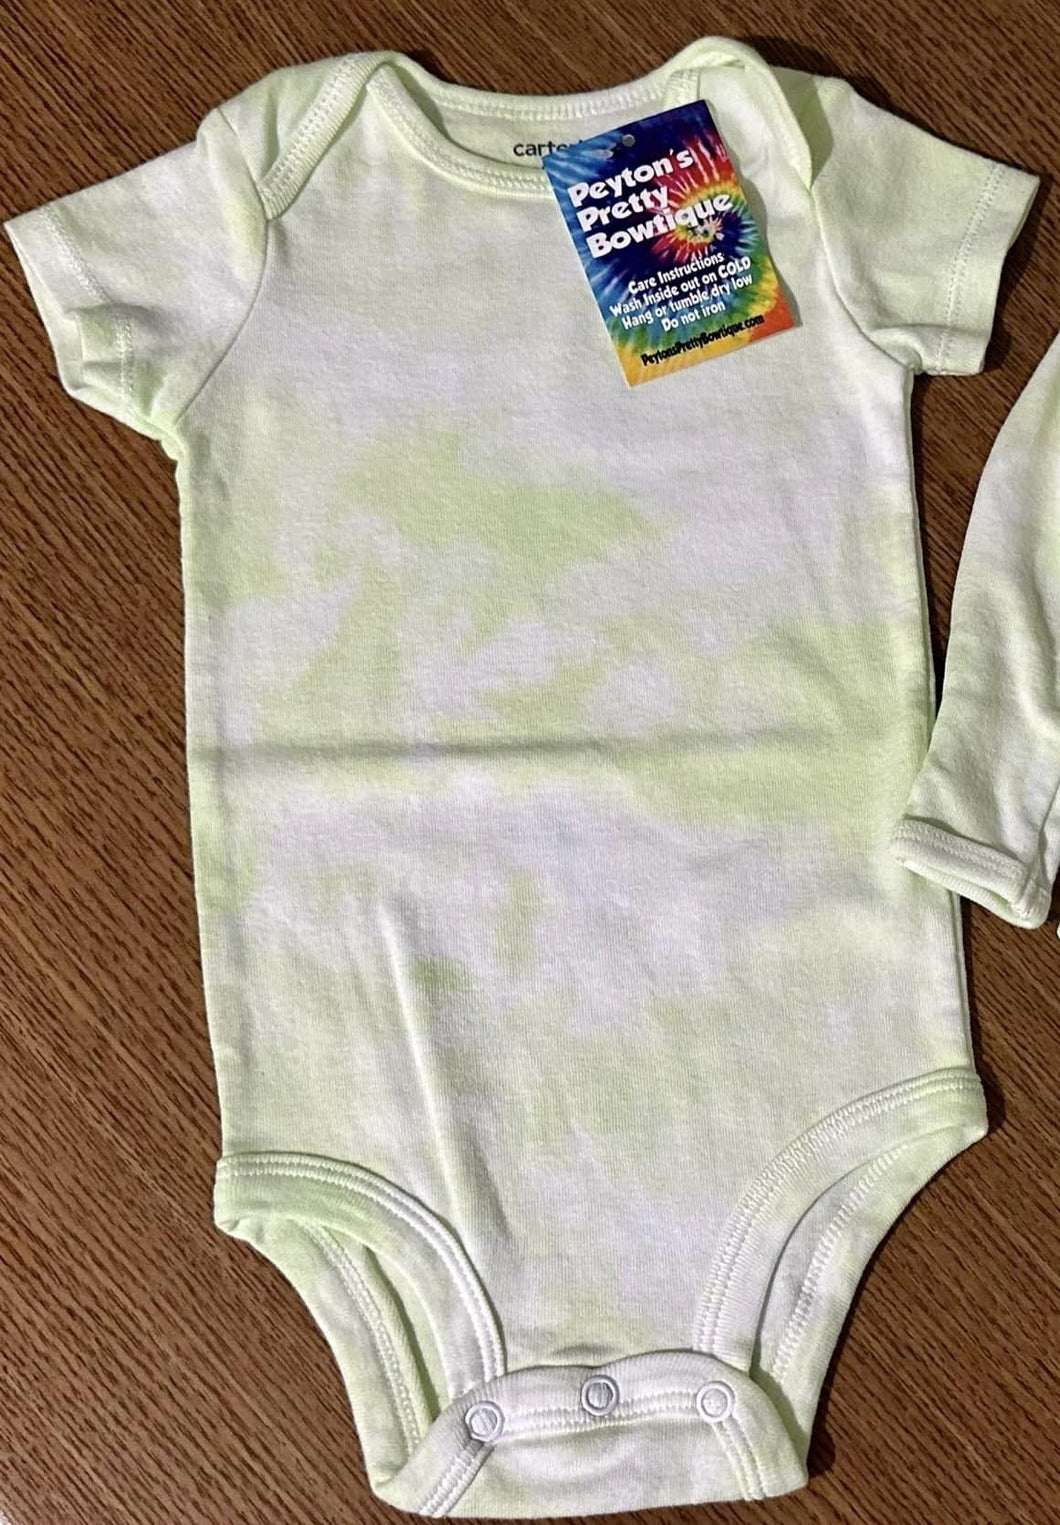 Hand Dyed Baby Bodysuit Size 9 Month